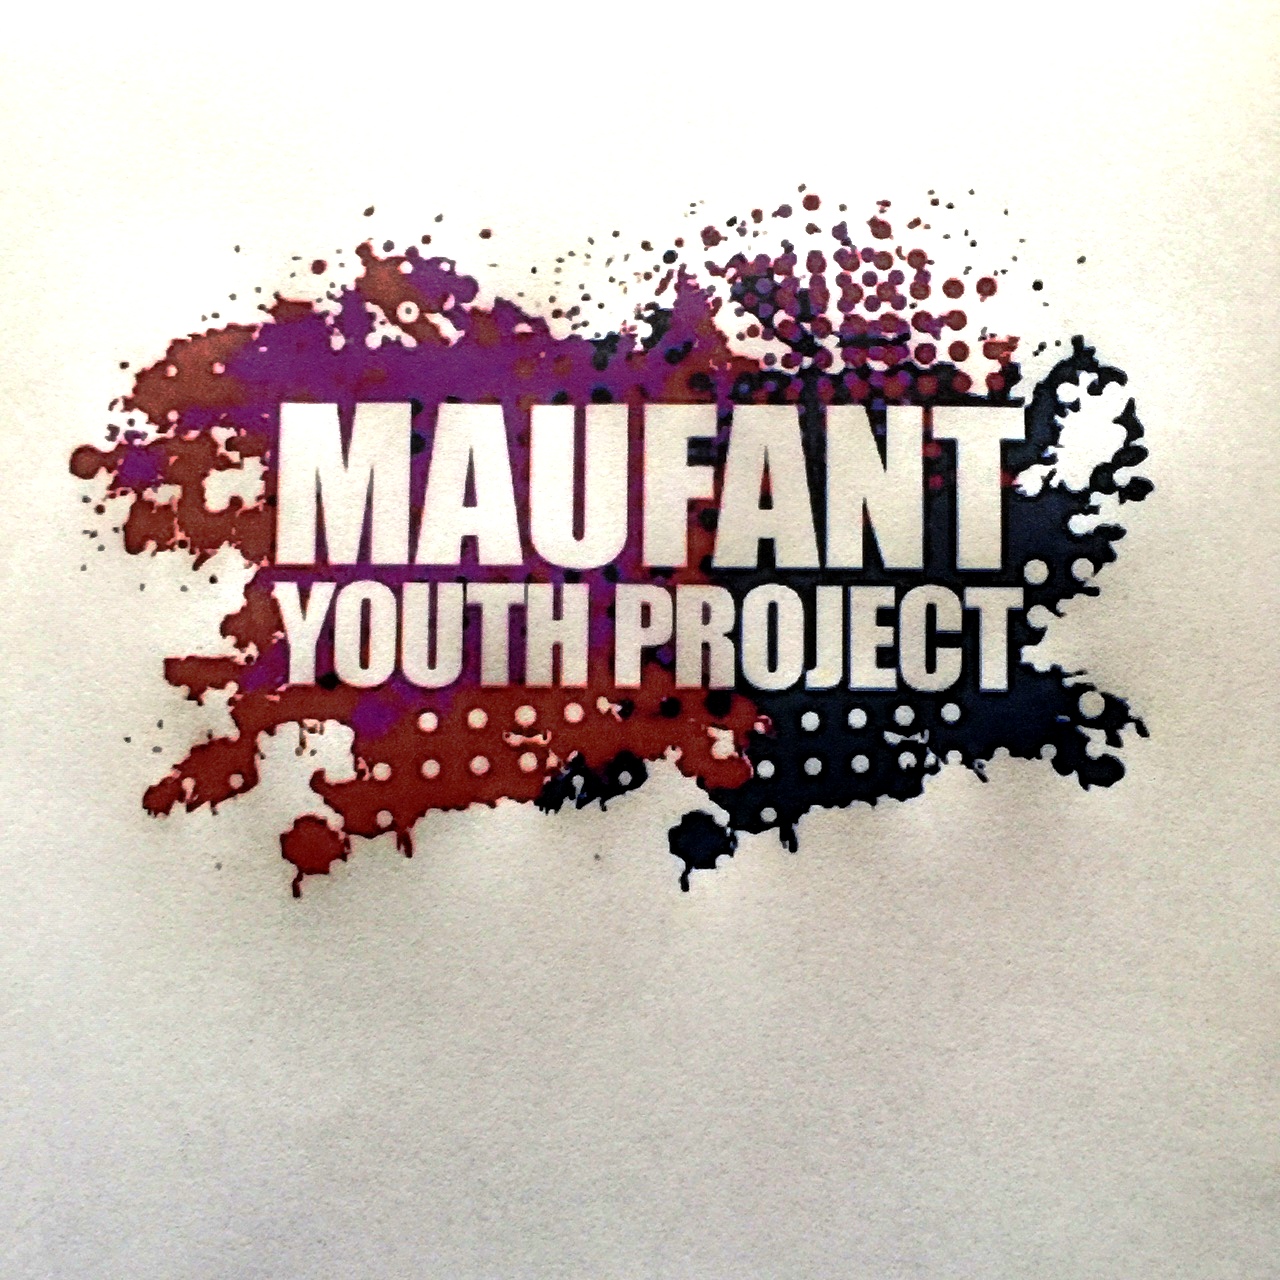 Maufant Youth Project